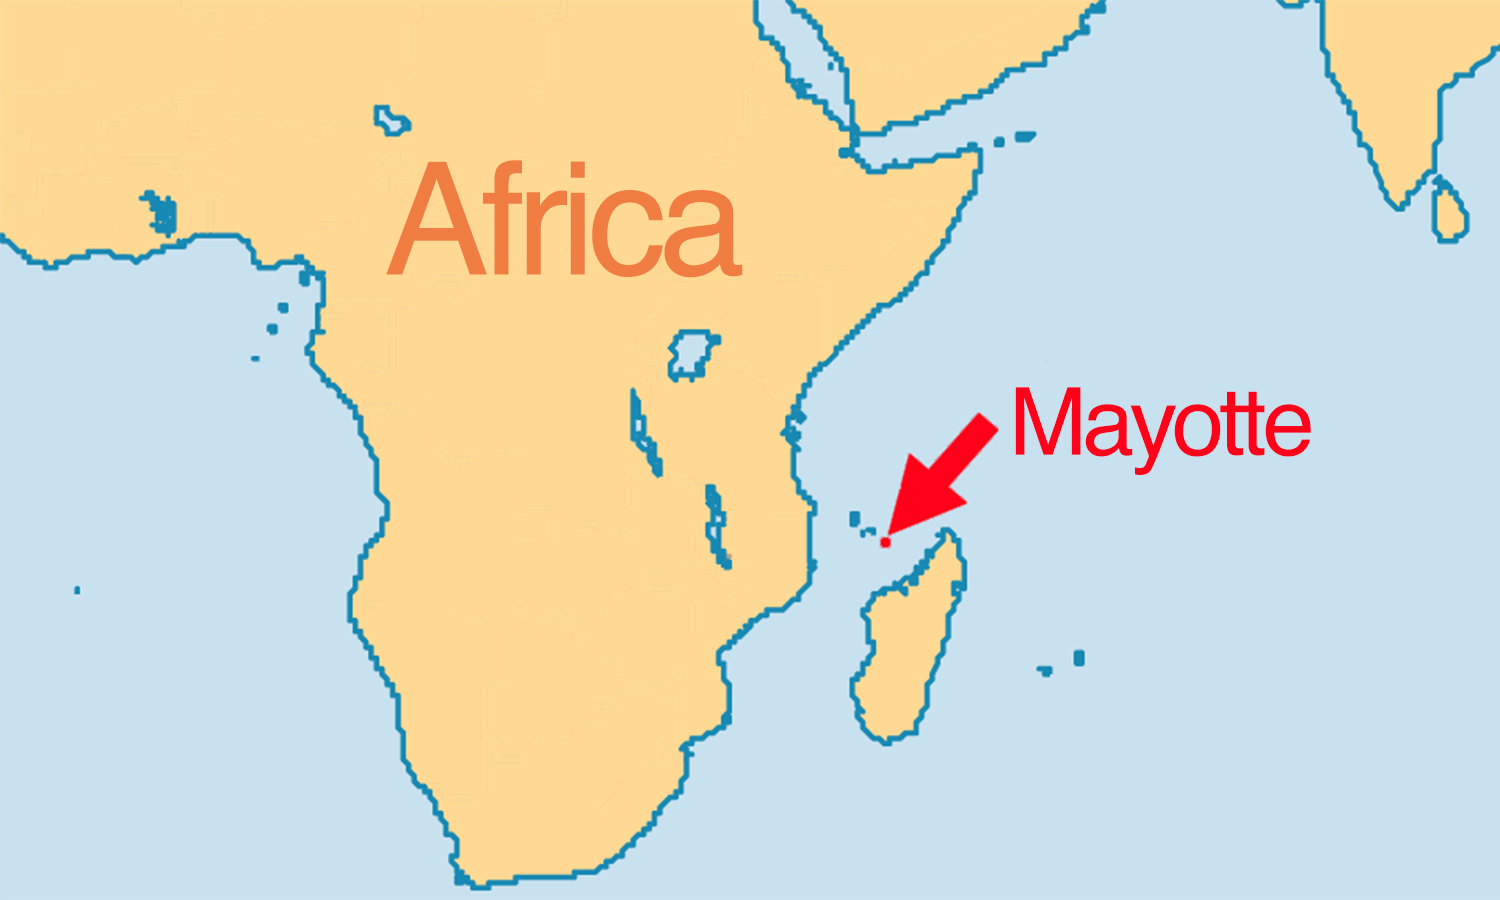 It centred here on the island of Mayotte. Credit: Cision